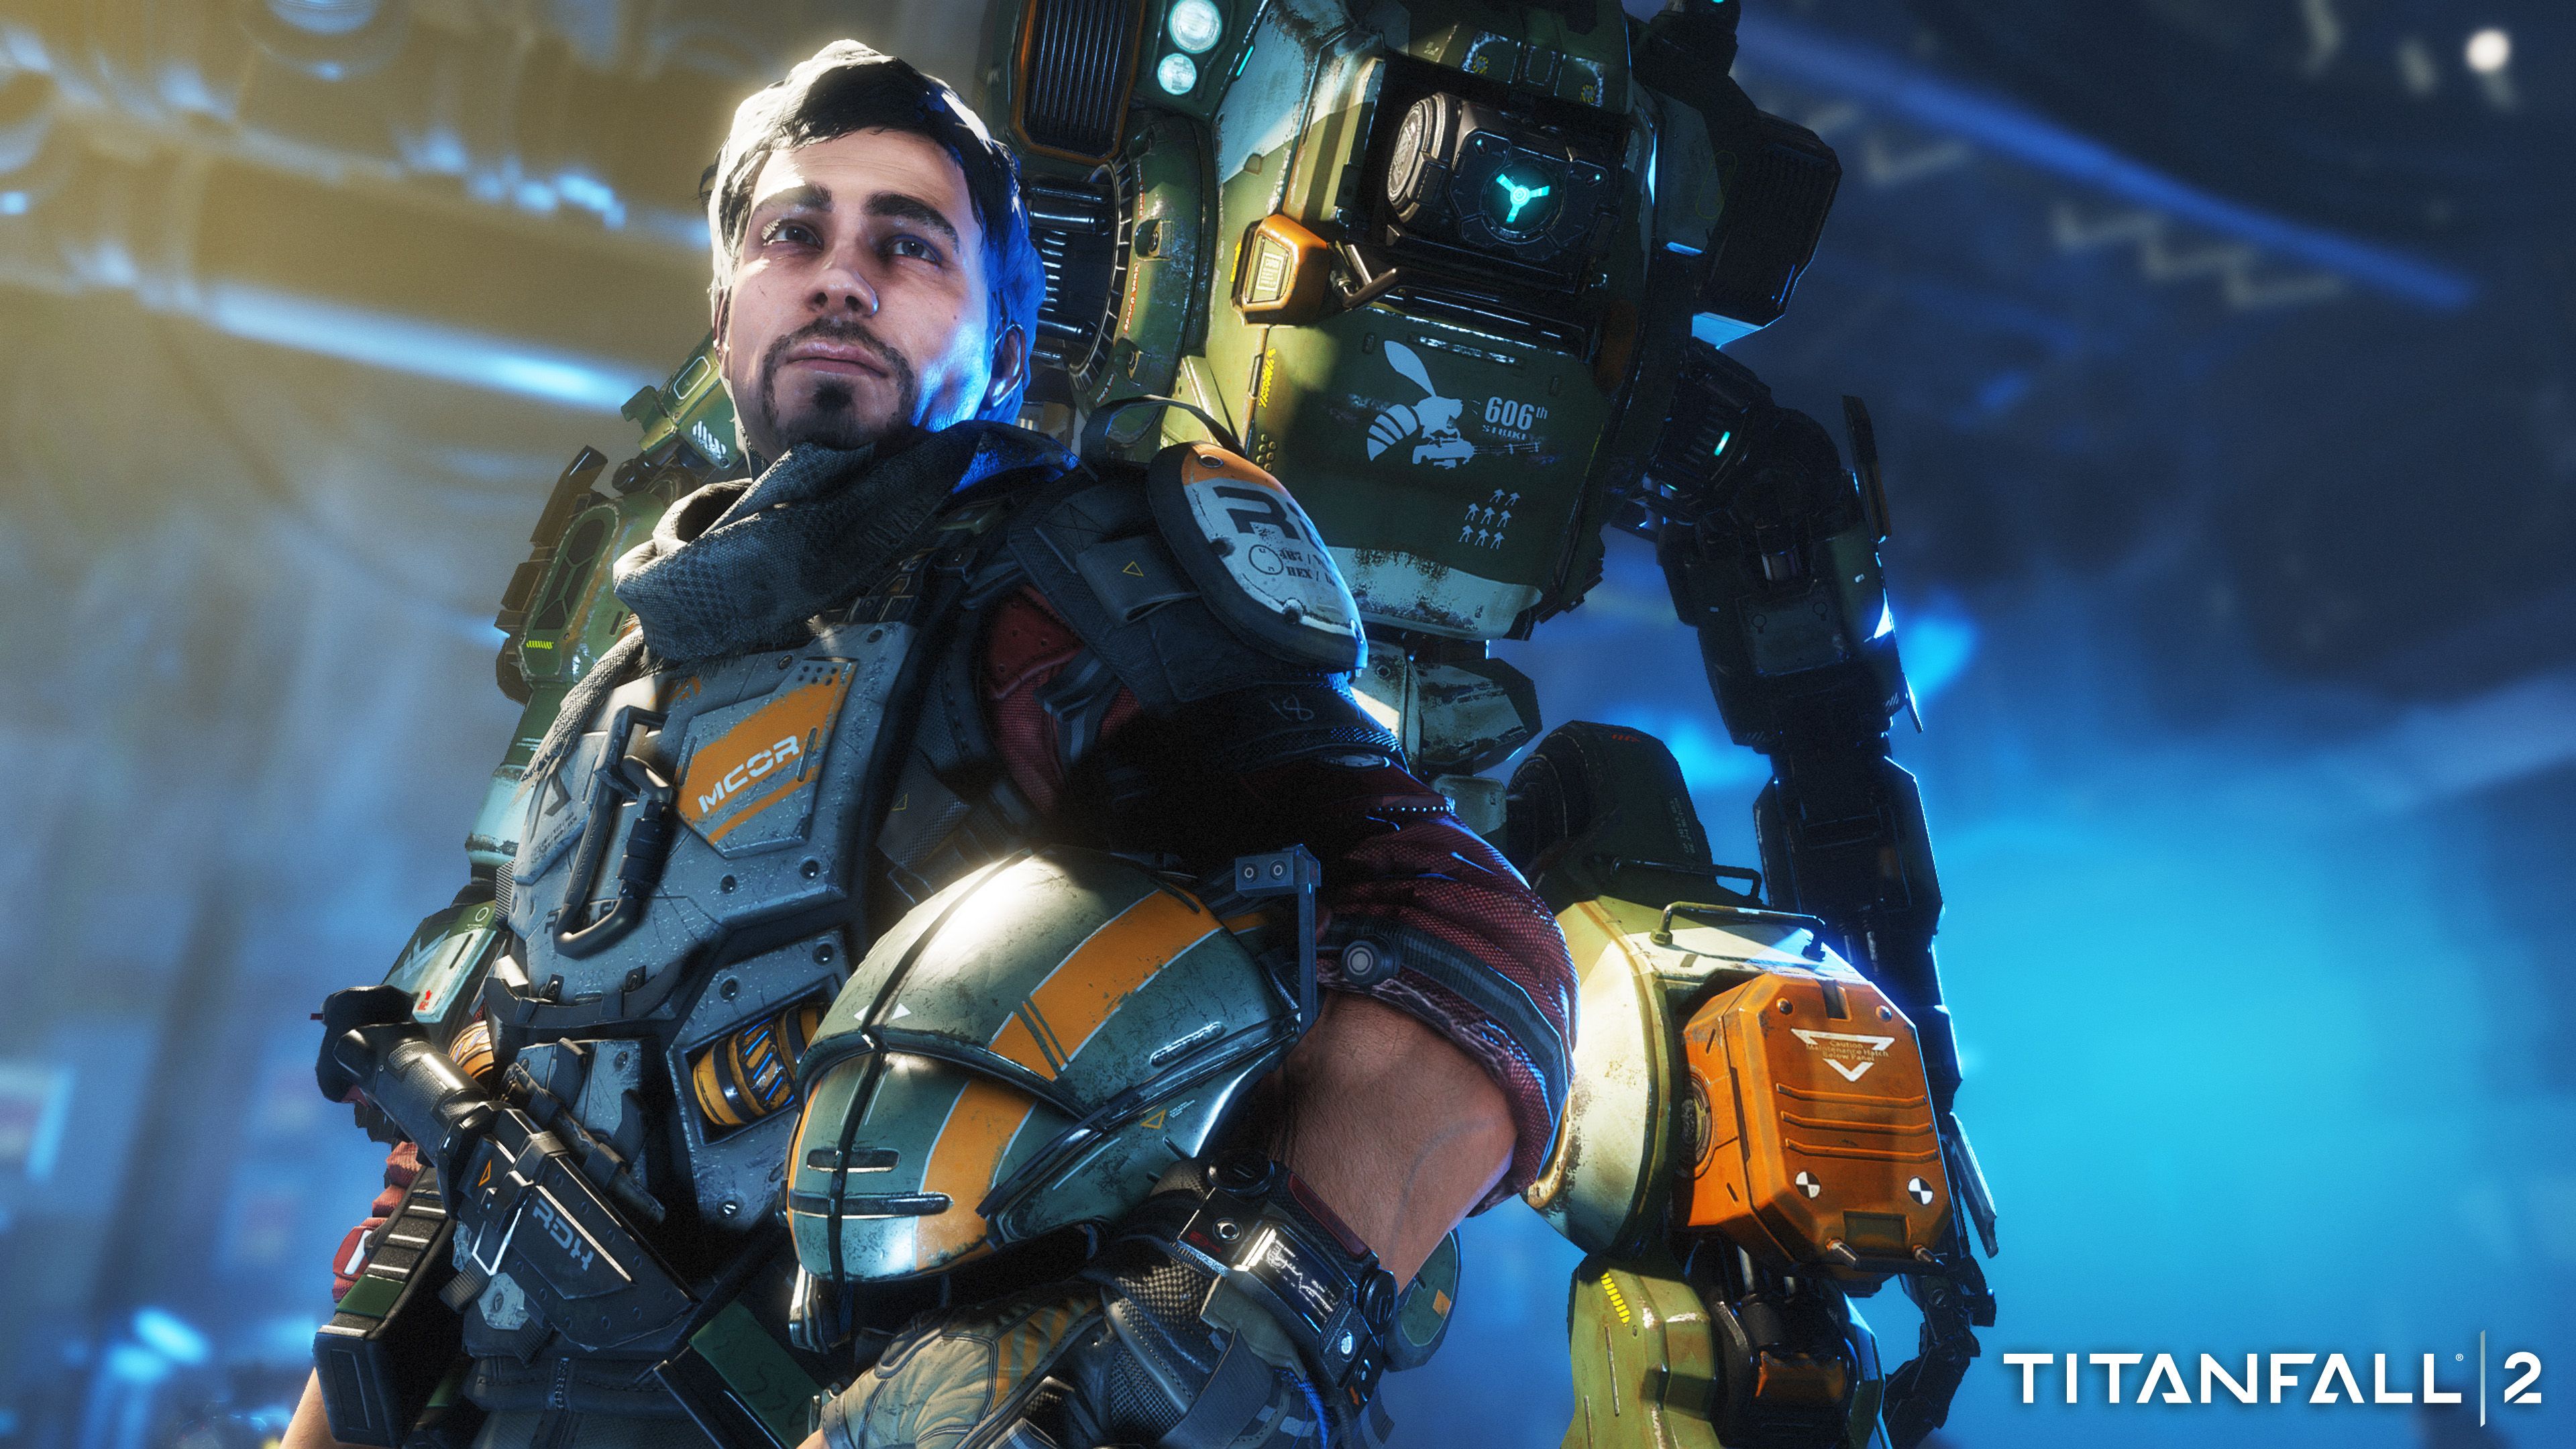 Titanfall 2 Multiplayer Free Trial Coming This Week